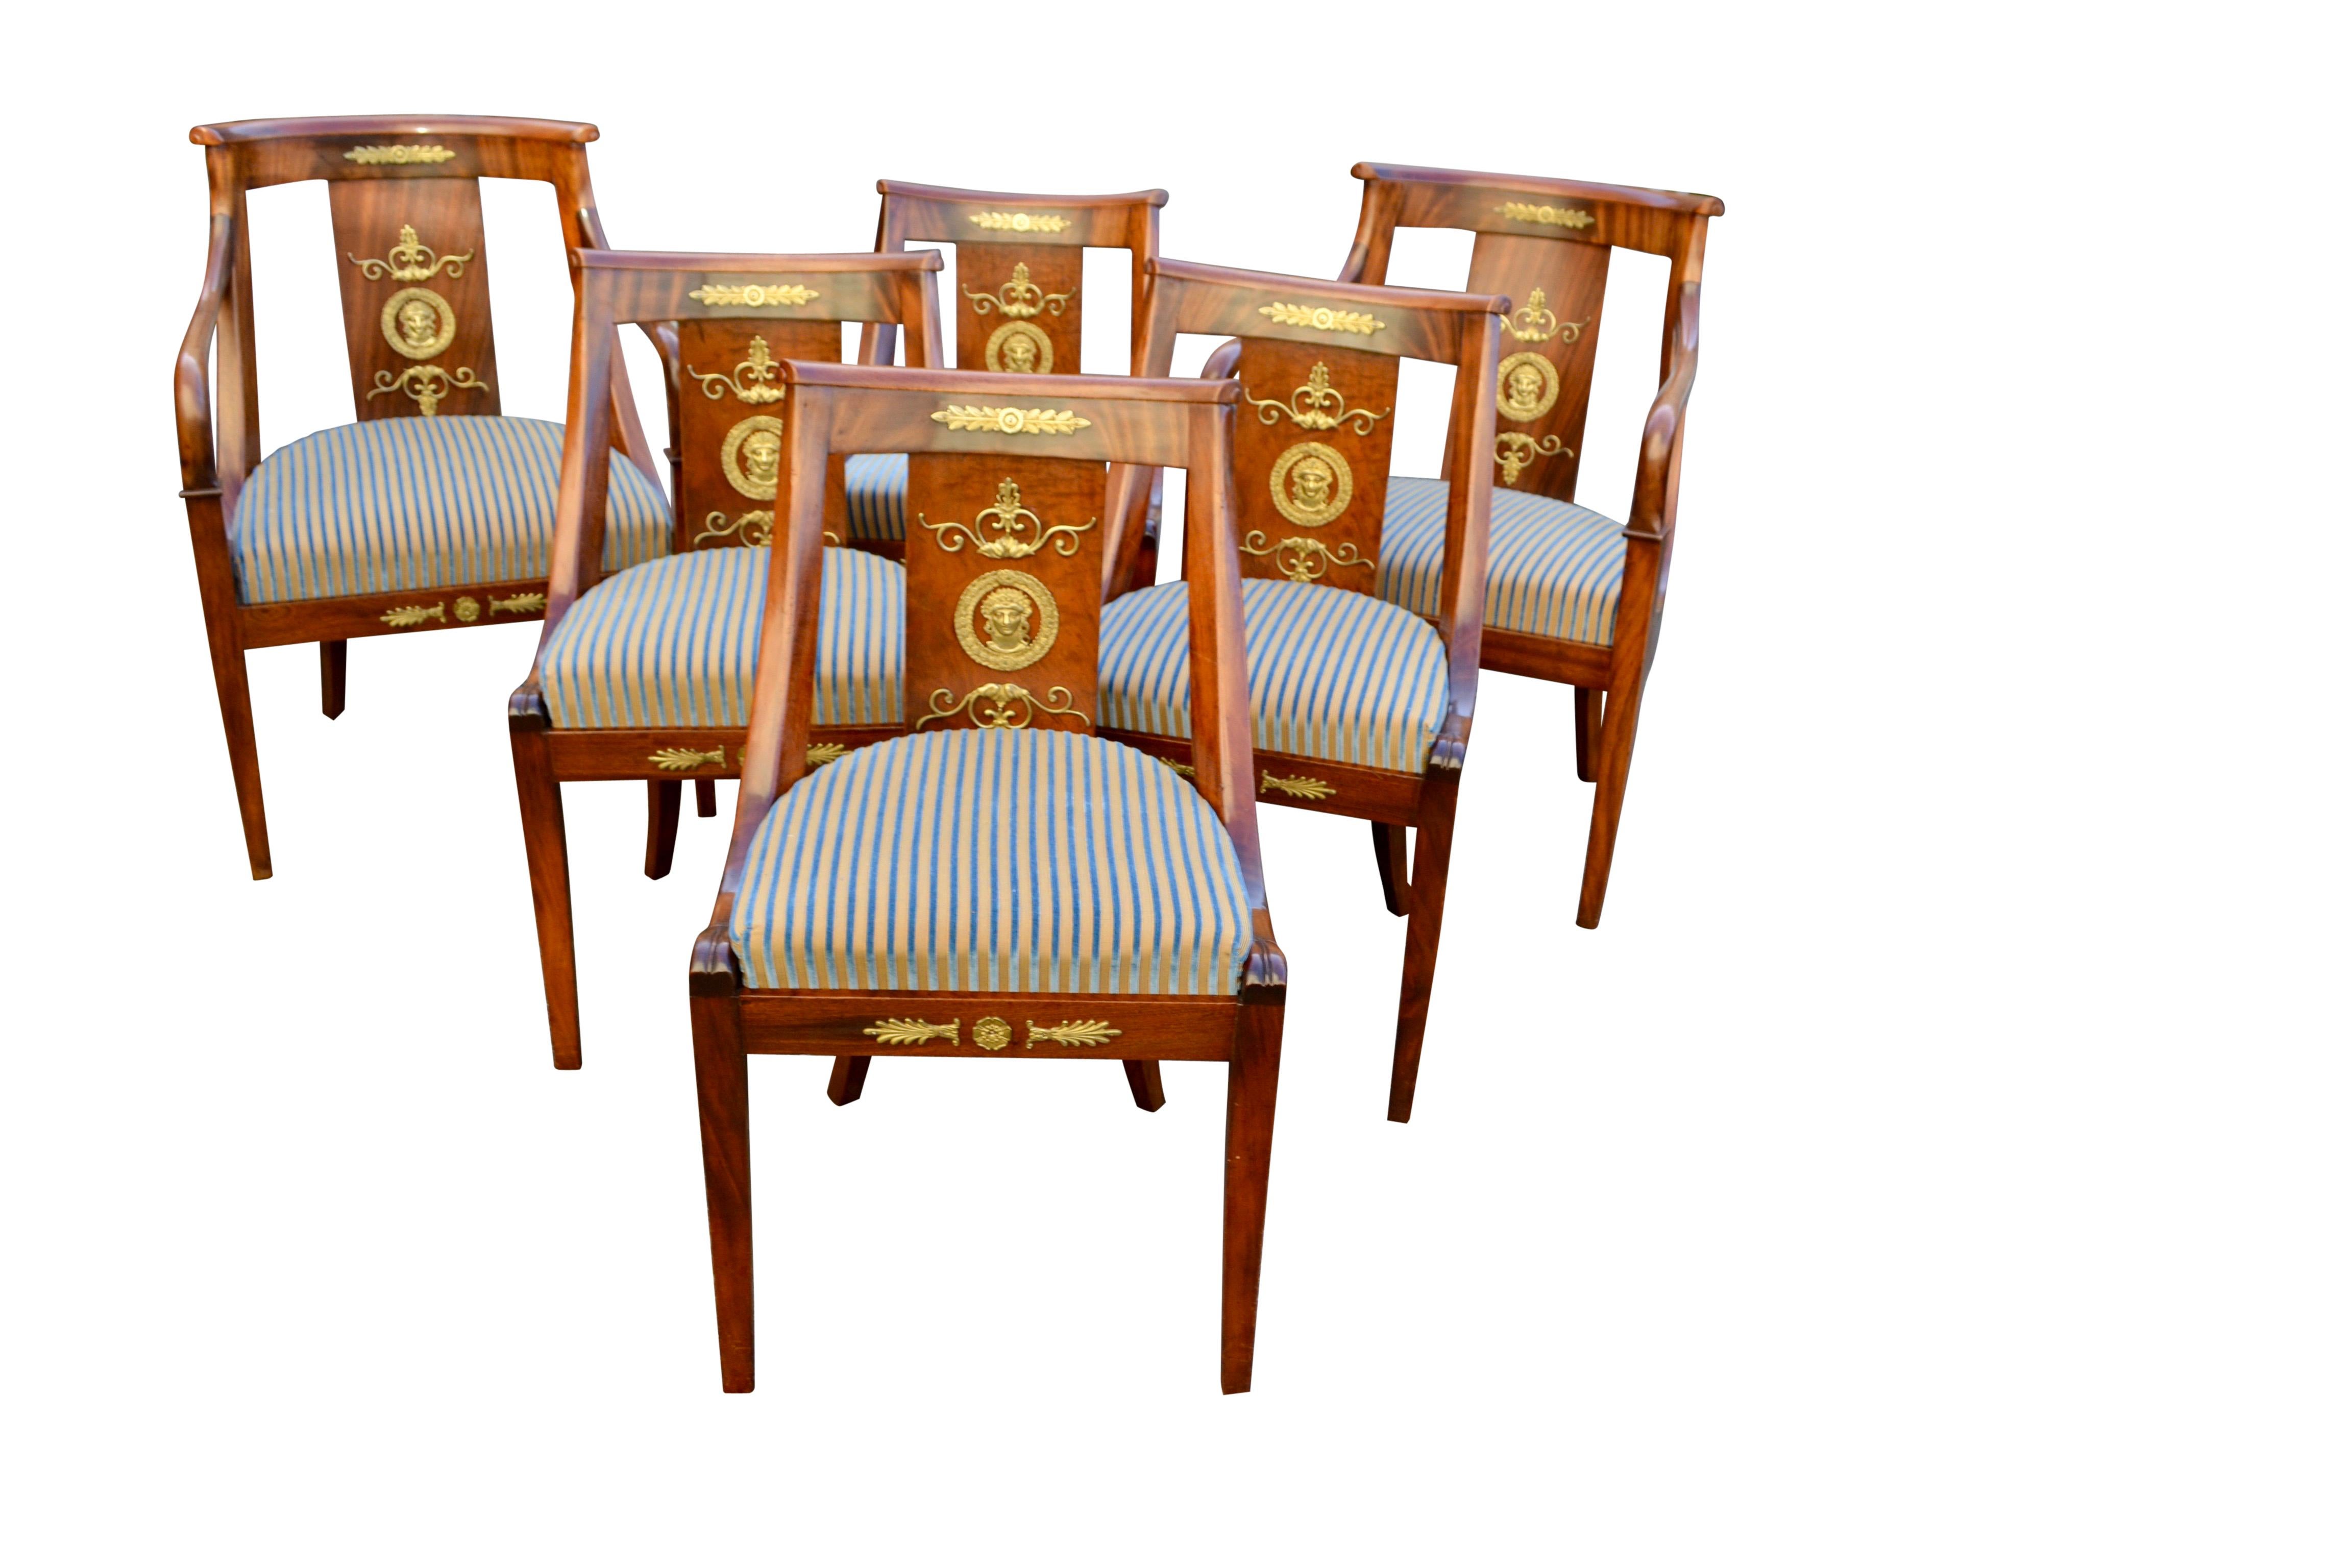 Set of Six Late 19 Century Empire Style Gondola Chairs In Good Condition For Sale In Vancouver, British Columbia